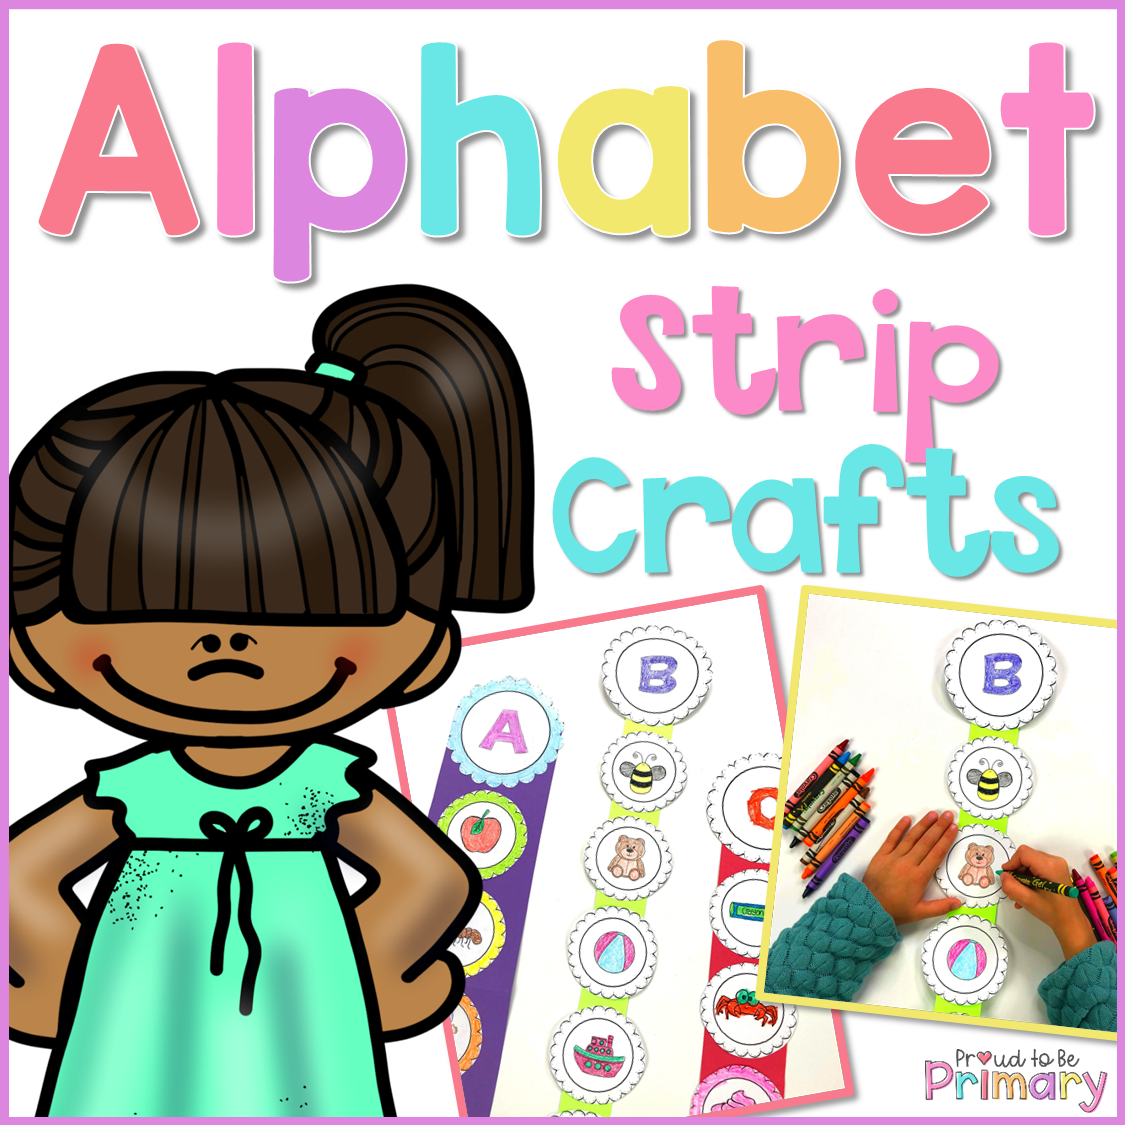 Alphabet Letter Sounds Strip Crafts - Proud to be Primary